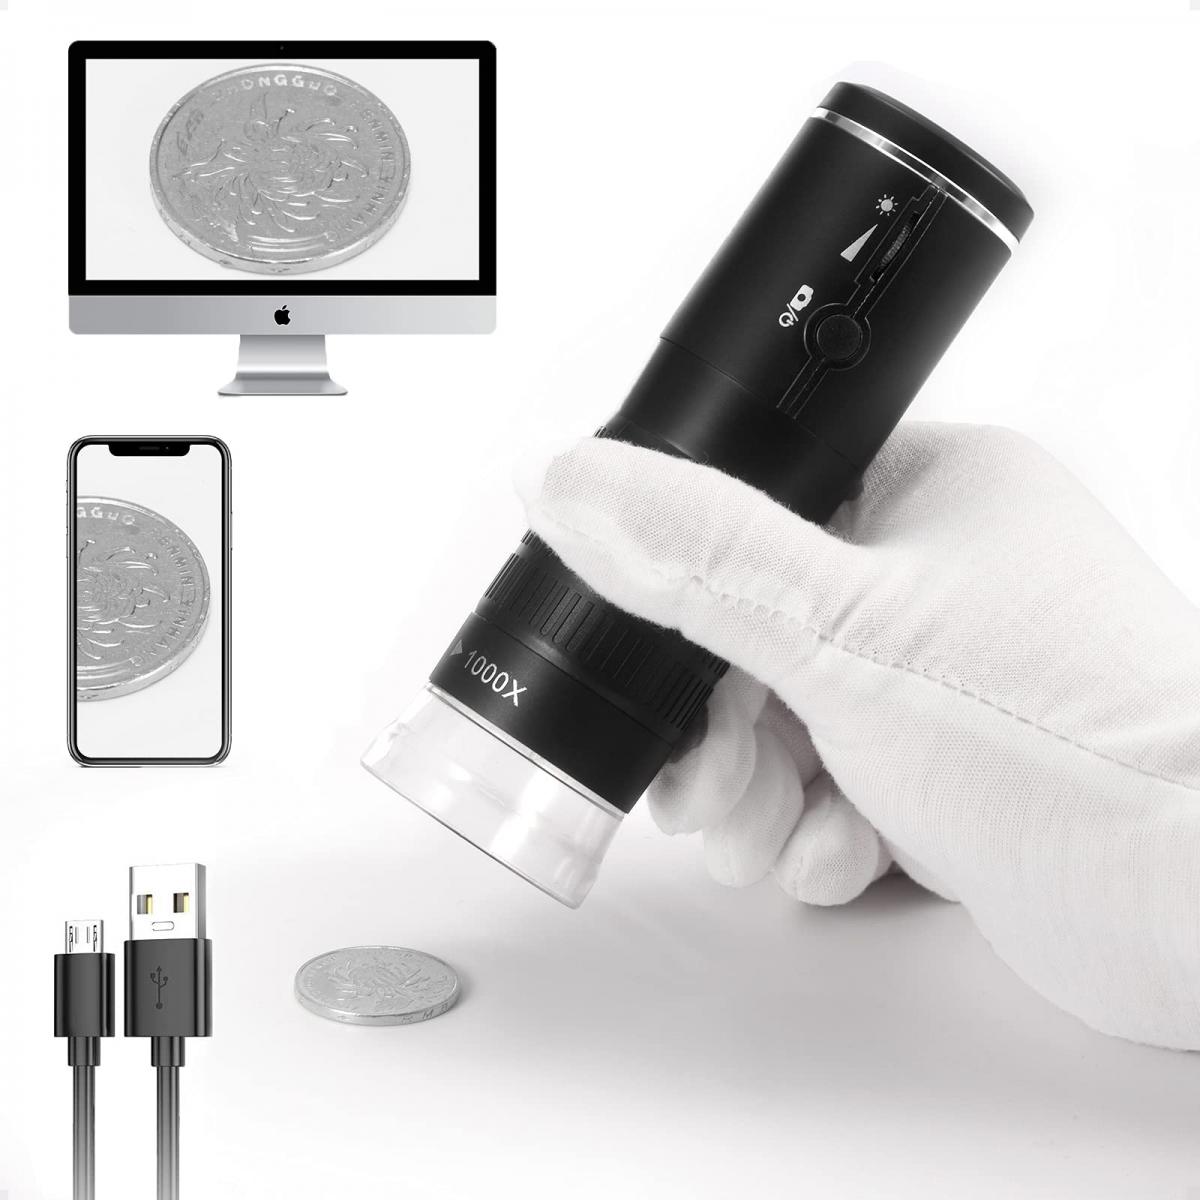 Rechargeable USB Microscope Gray Veroyi Wireless Digital Microscope 1080P 50X to 1000X WiFi Pocket Magnification Magnifier 